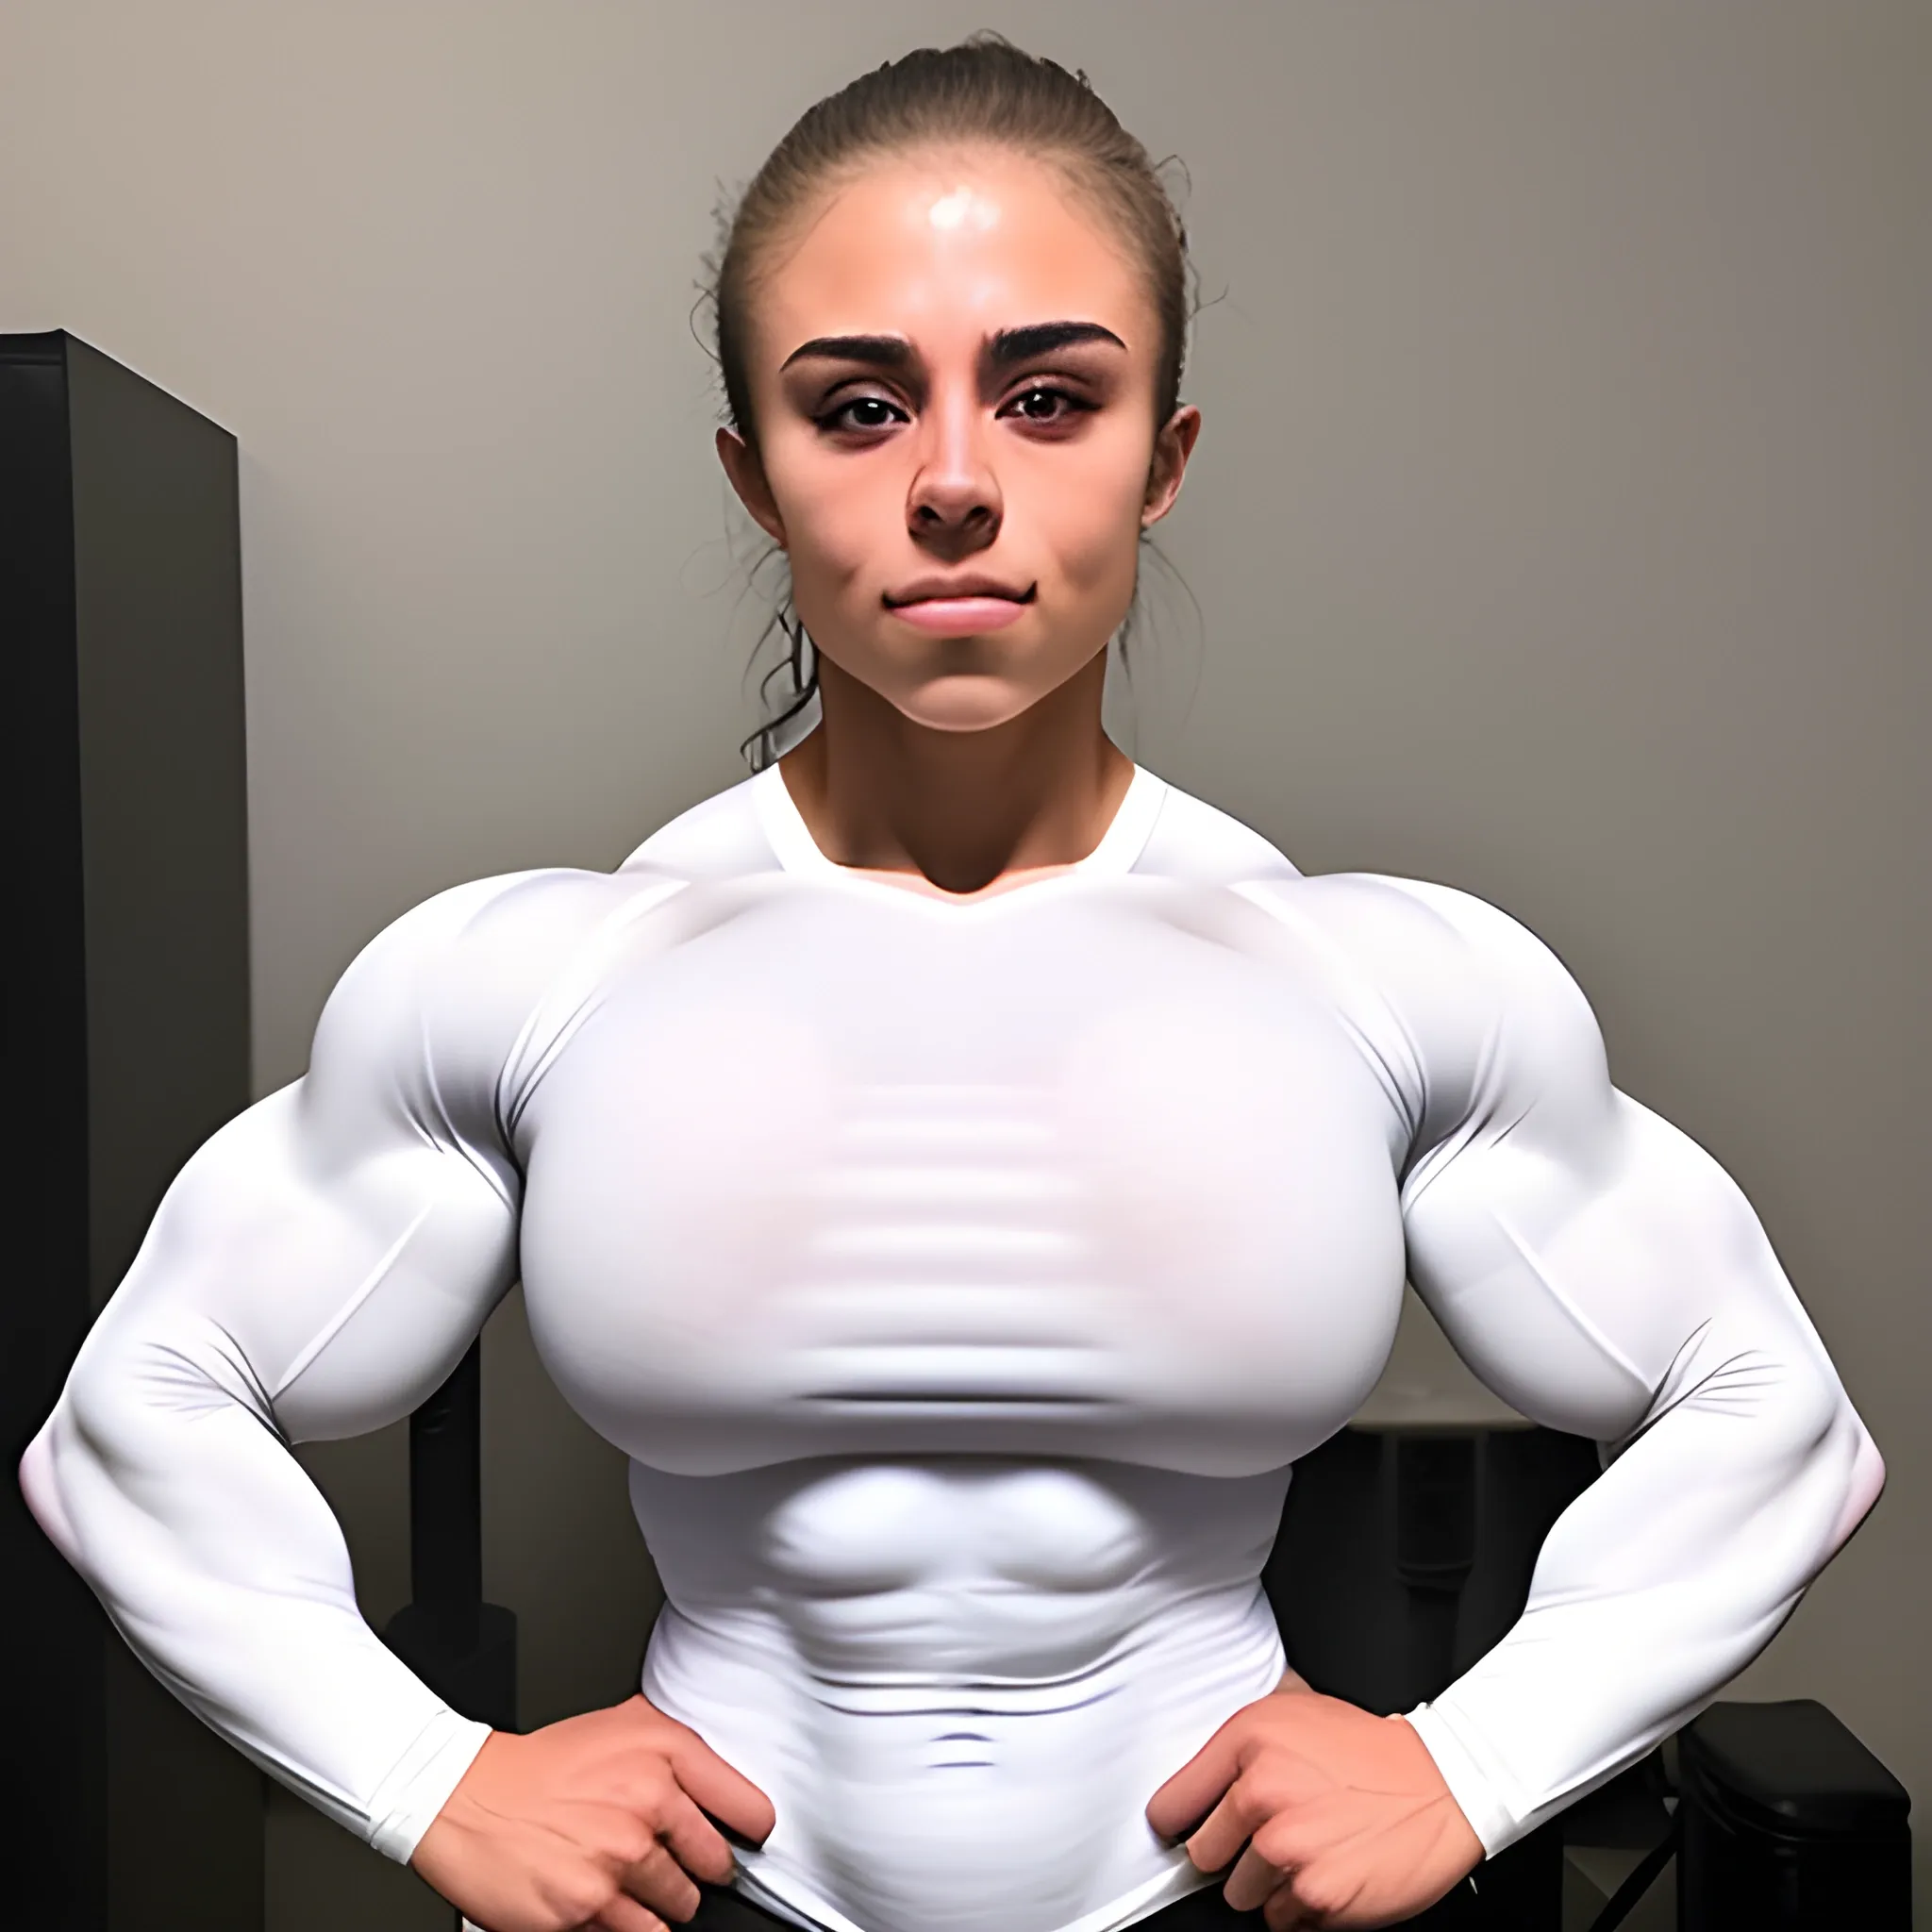 20 year old hyper-muscled female bodybuilder with 25 inch biceps 